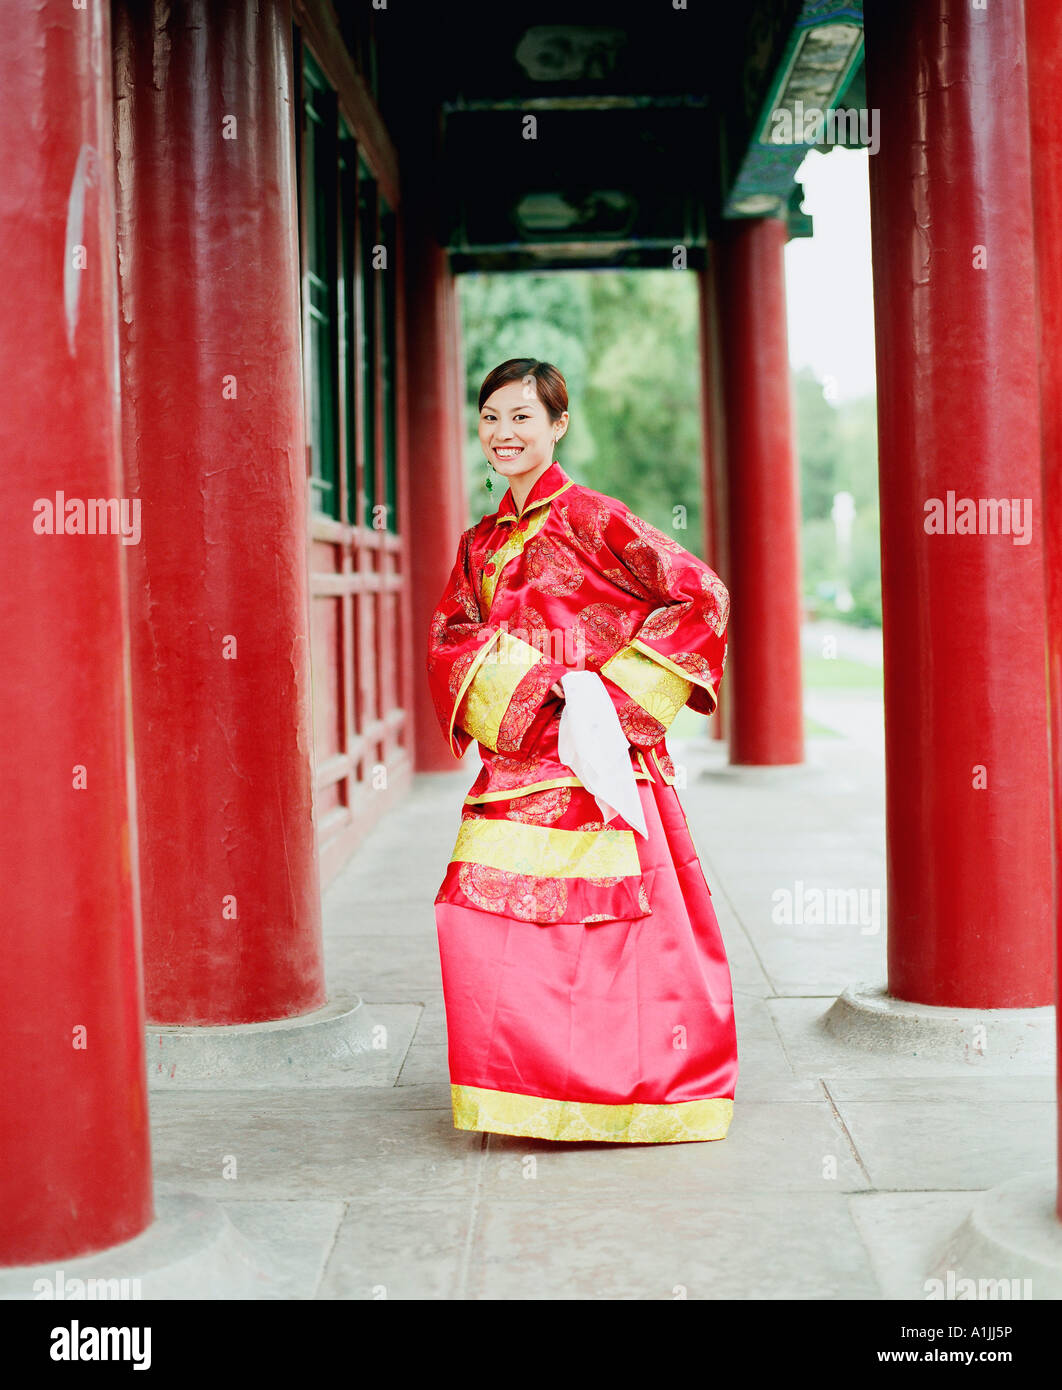 Portrait of a young woman dancing in the traditional clothing Stock Photo